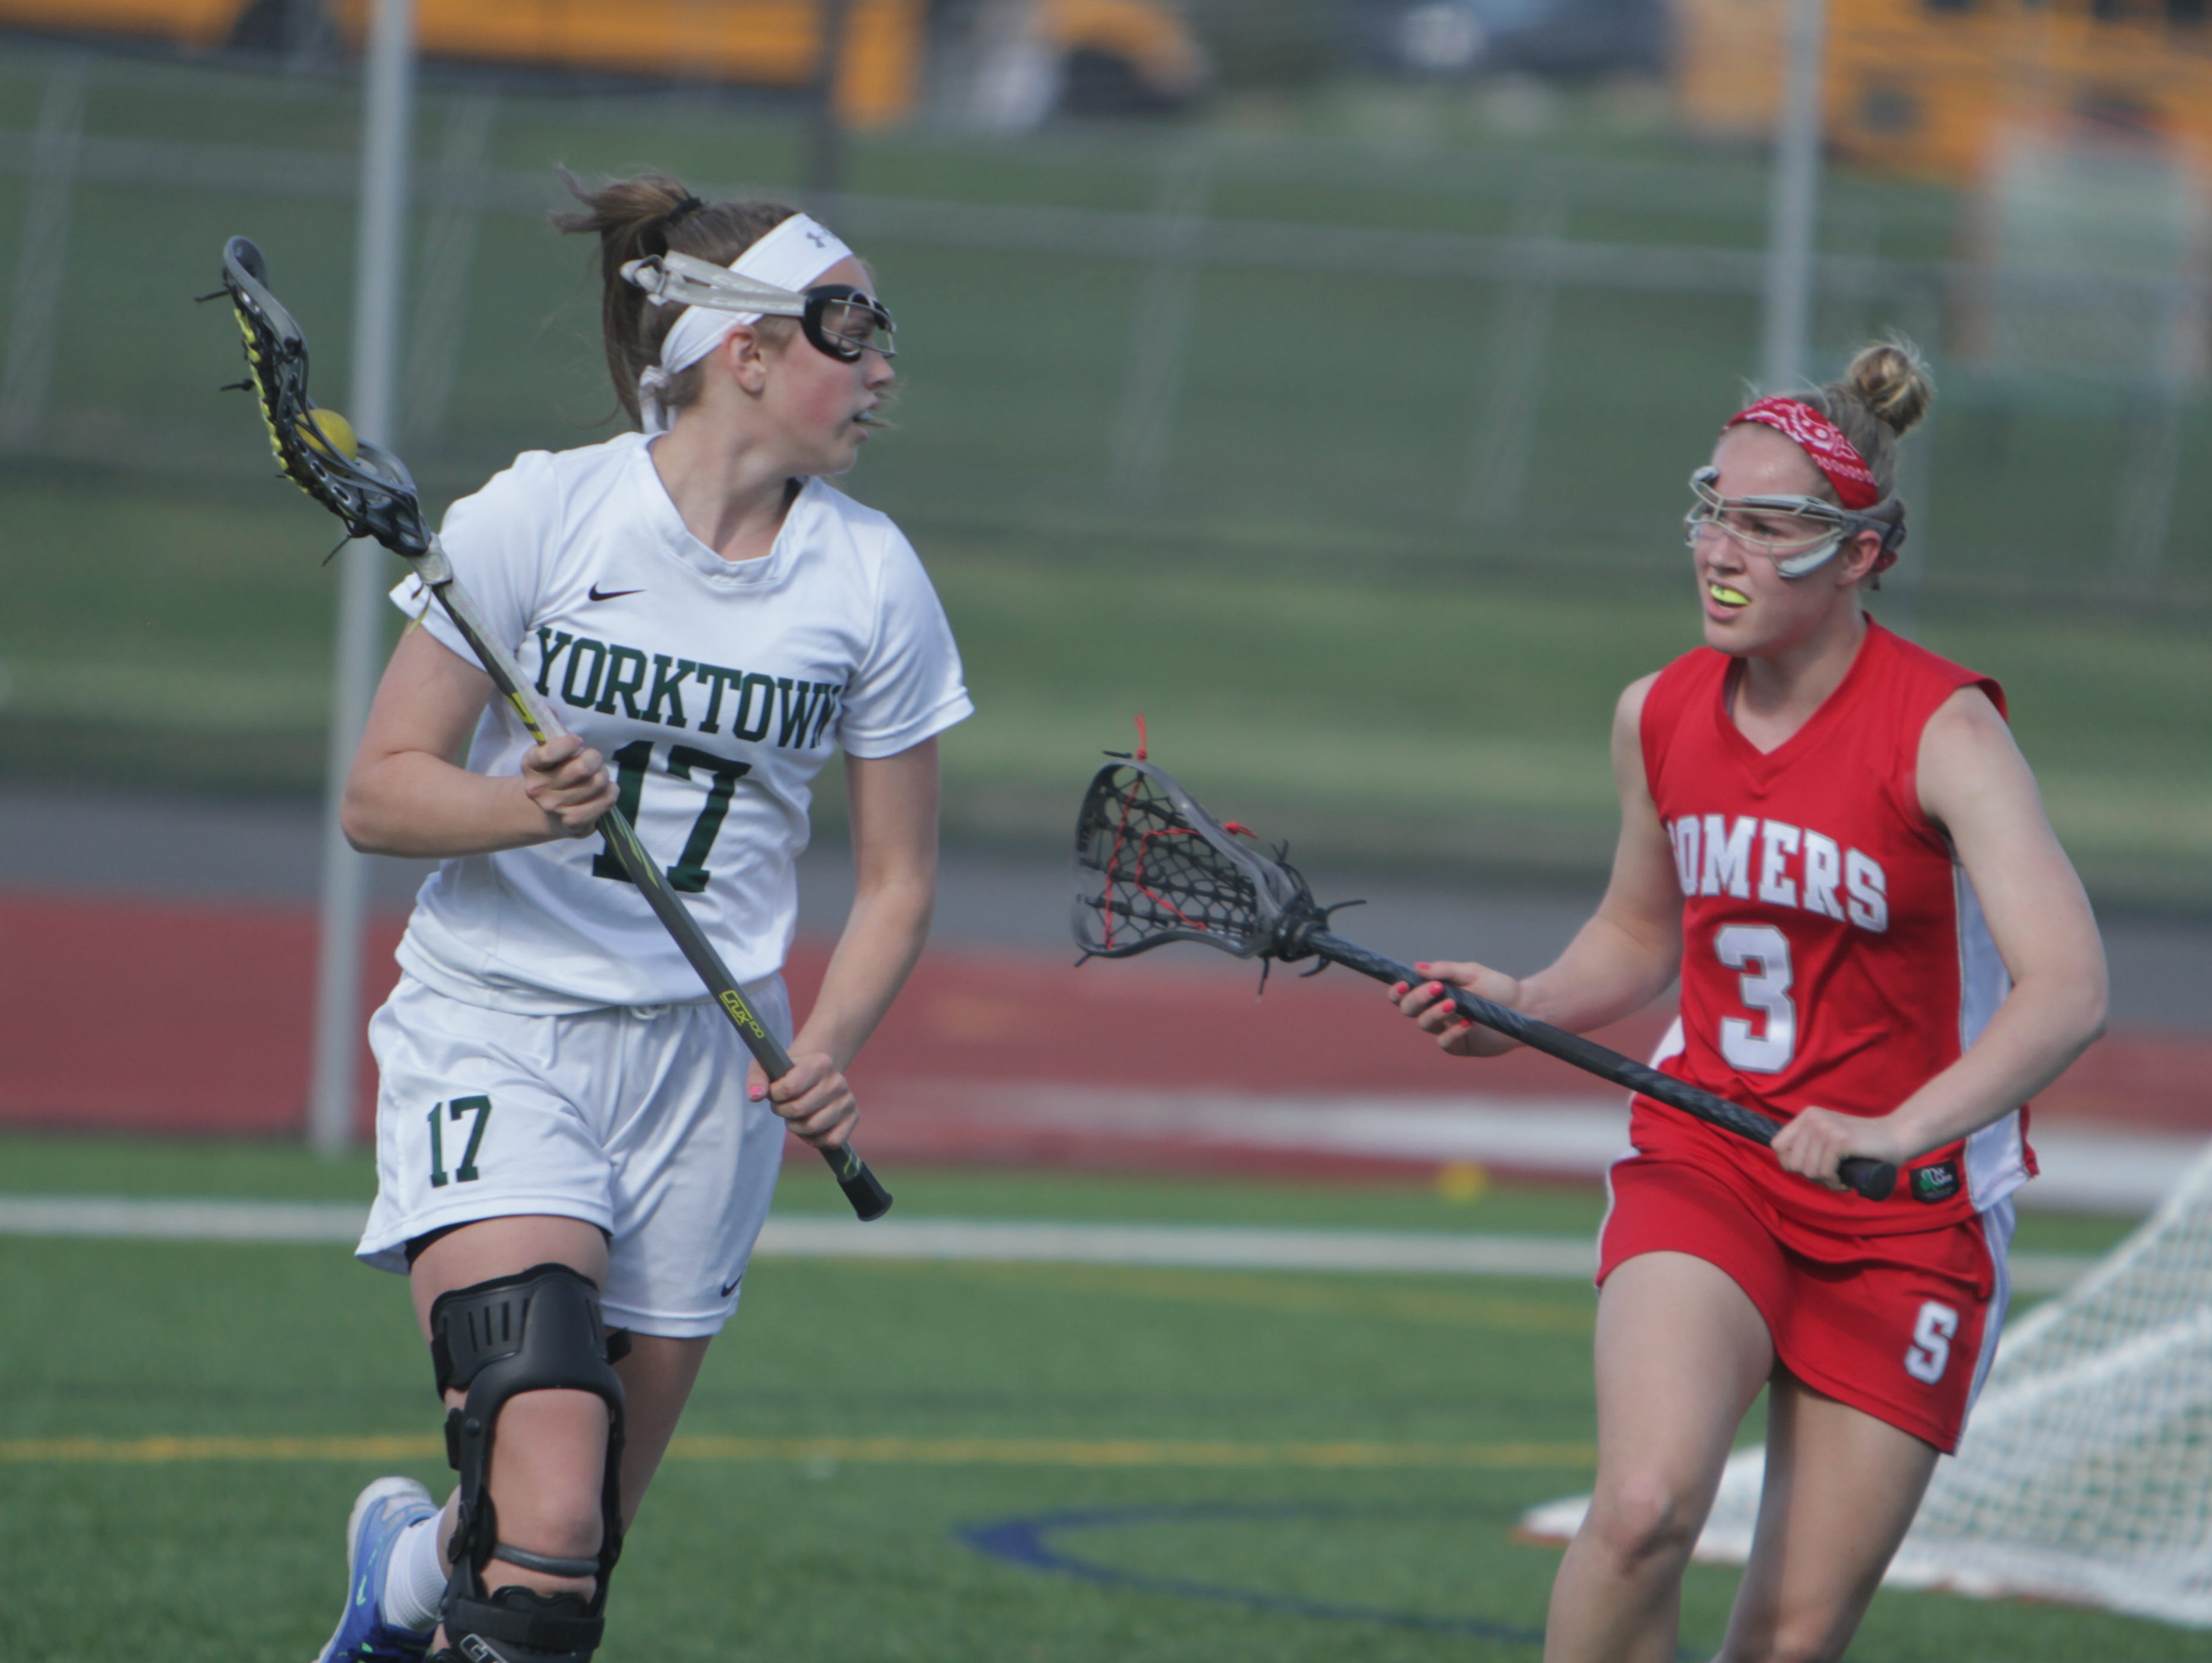 Action during a Section 1 girls lacrosse game between Yorktown and Somers at Yorktown High School on Thursday, April 21st, 2016. Somers won 11-10.